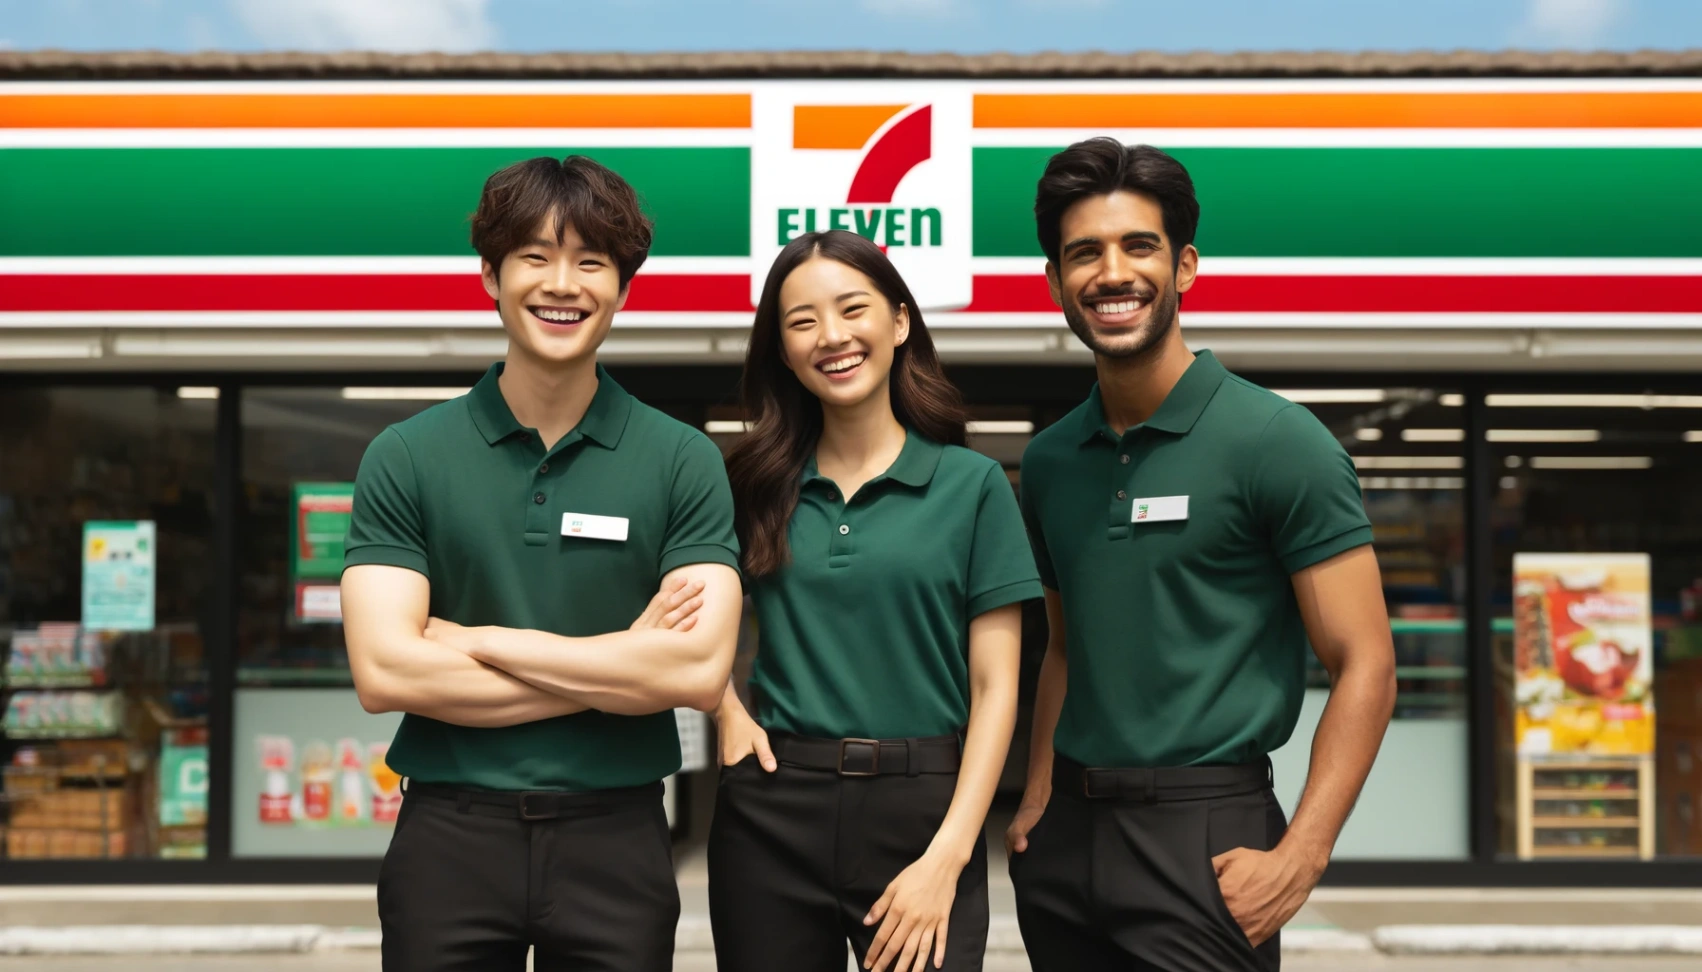 Get Hired at 7-Eleven: Step-by-Step Guide to Apply